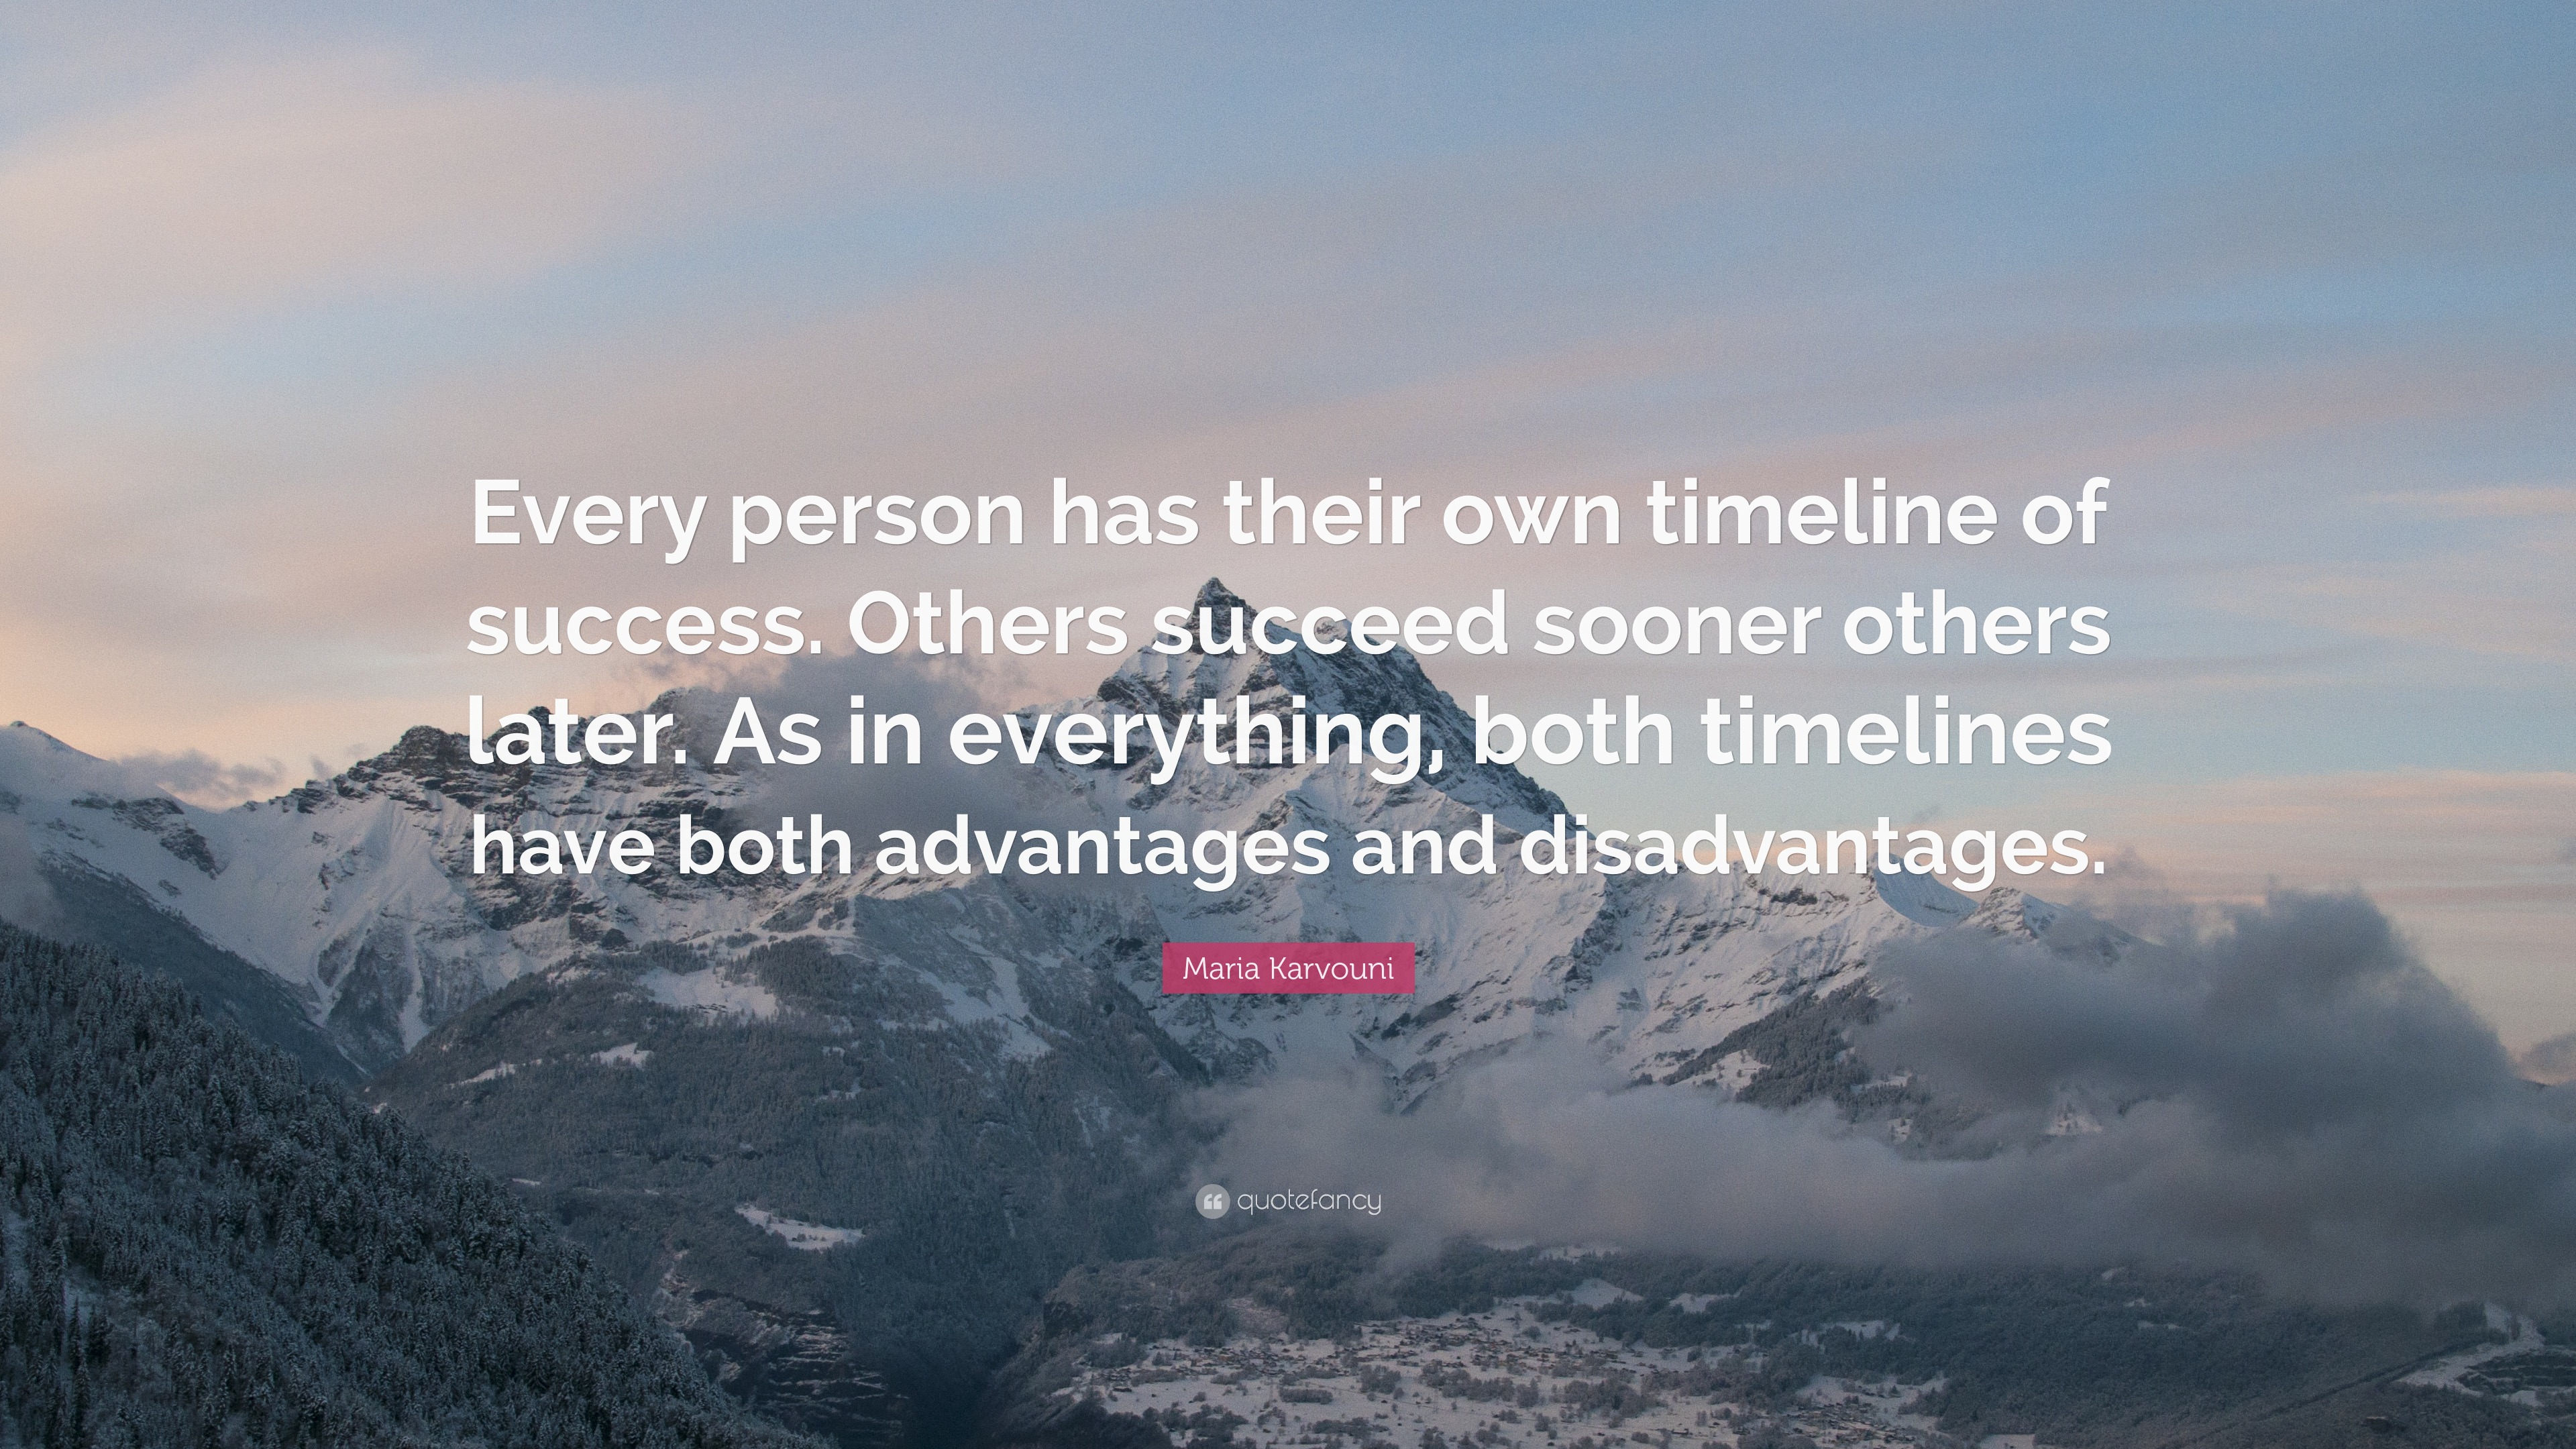 Maria Karvouni Quote: “Every person has their own timeline of